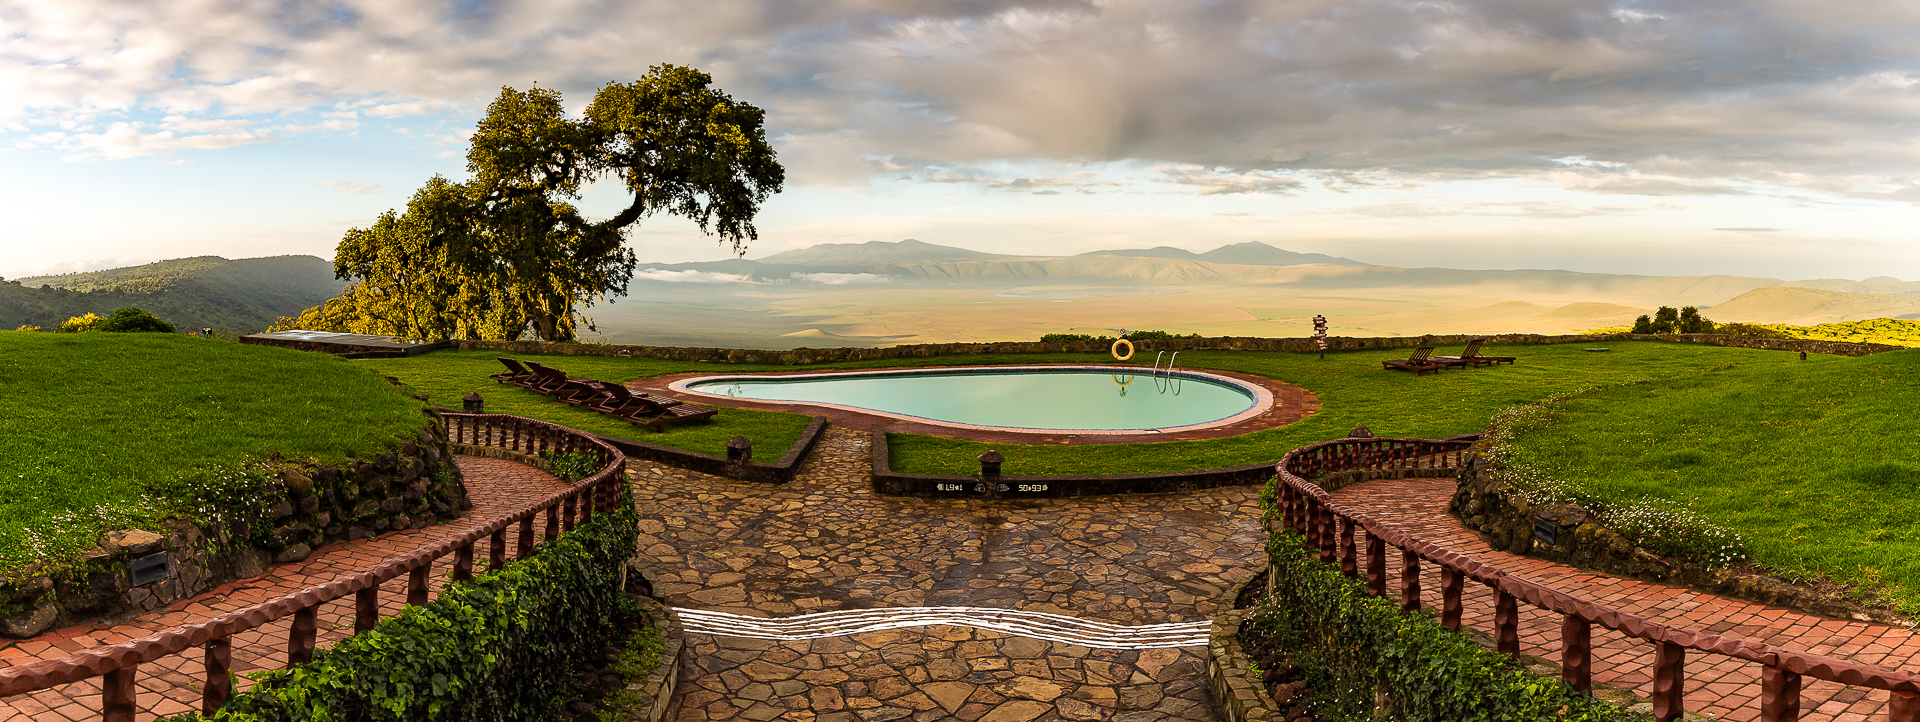 Ngorongoro Crater from the Sopa Lodge